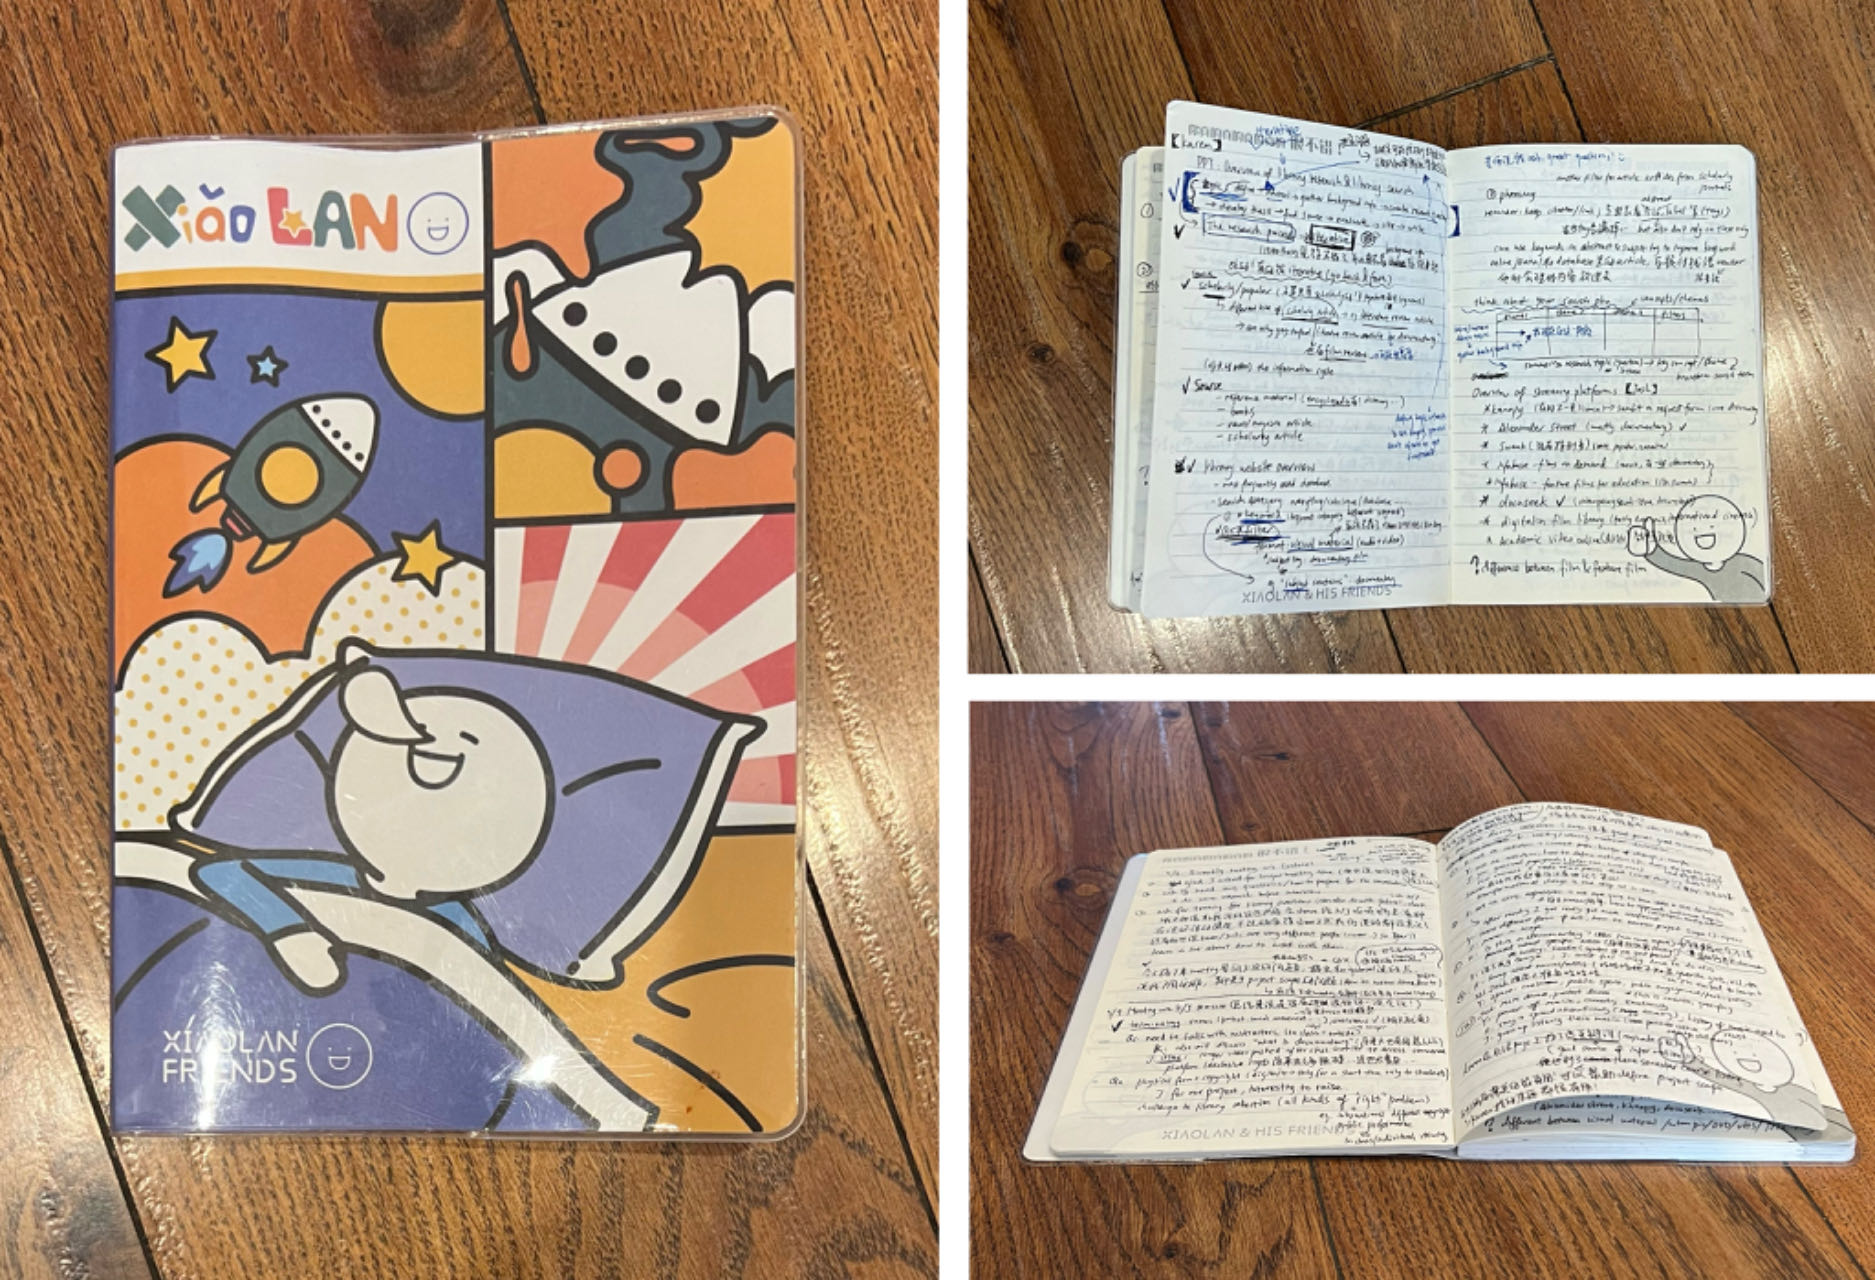 A picture of the author's blue notebook cover with a cartoon figure lying on bed and two pictures of the notebook's inner pages filled with notes